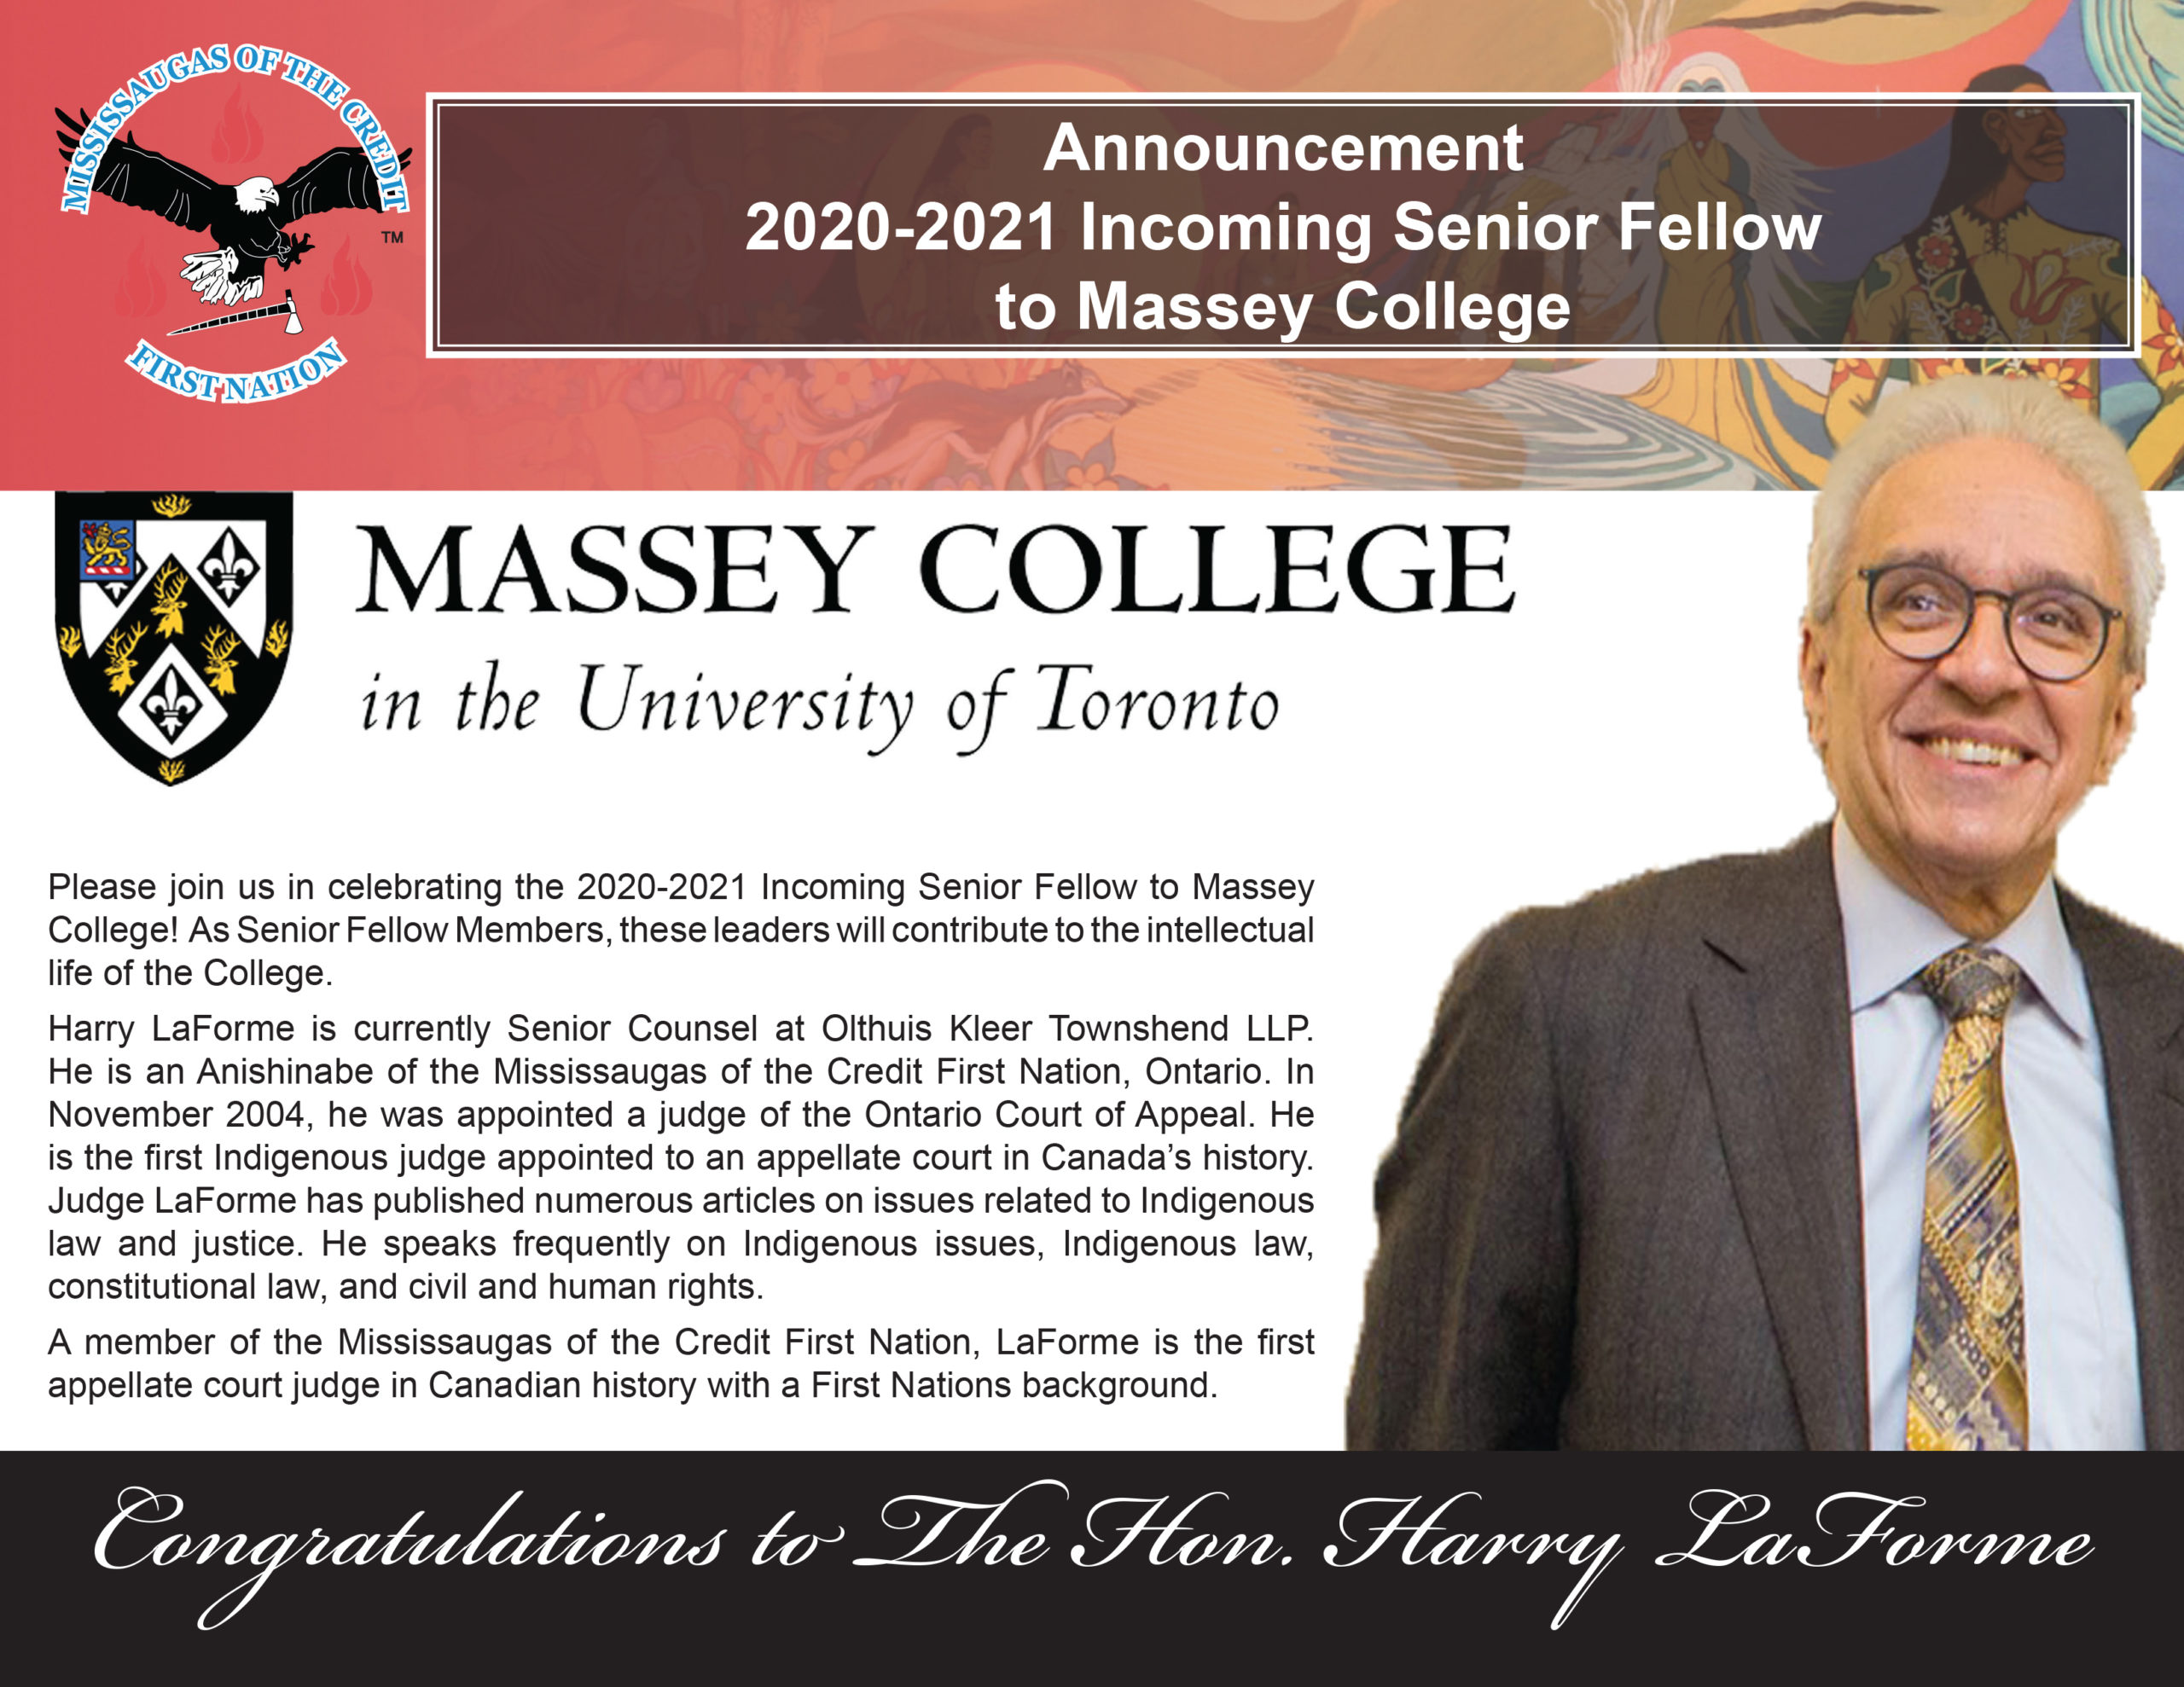 The Honourable Harry LaForme Welcomed as Senior Fellow at Massey College